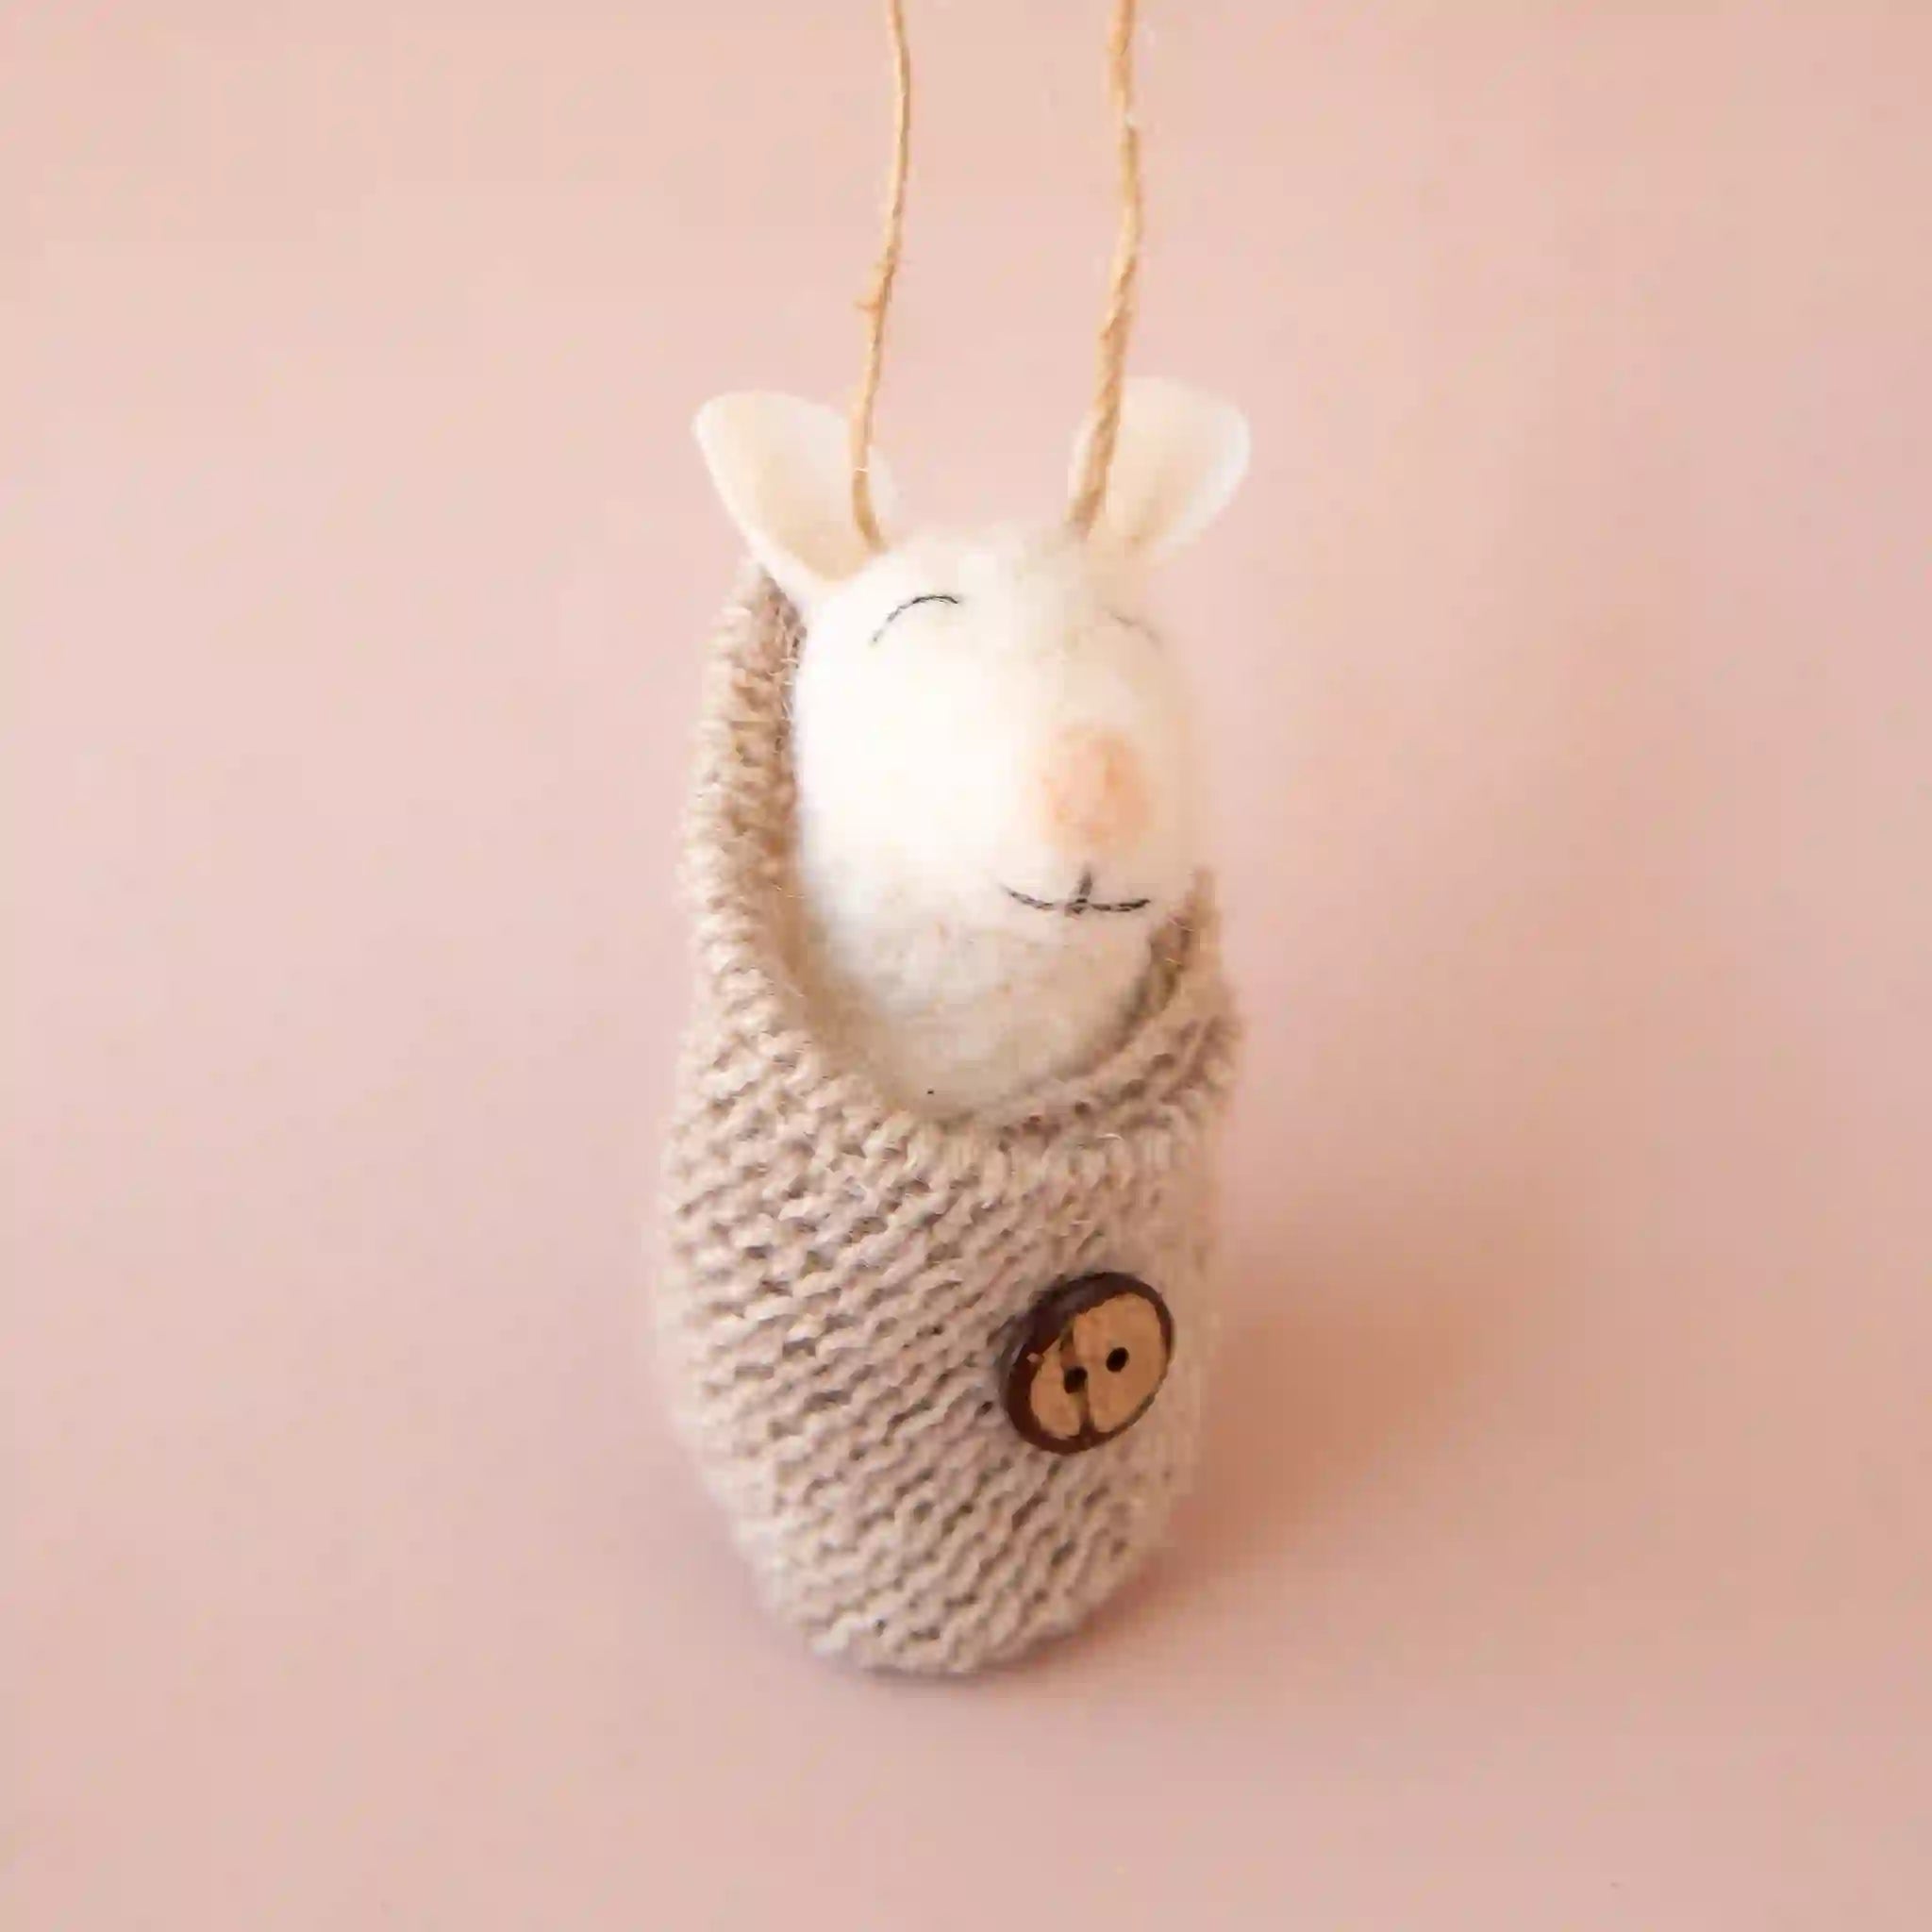 On a pink background is a felt baby mouse shaped ornament wrapped in a tan knit swaddle fastened with a button.